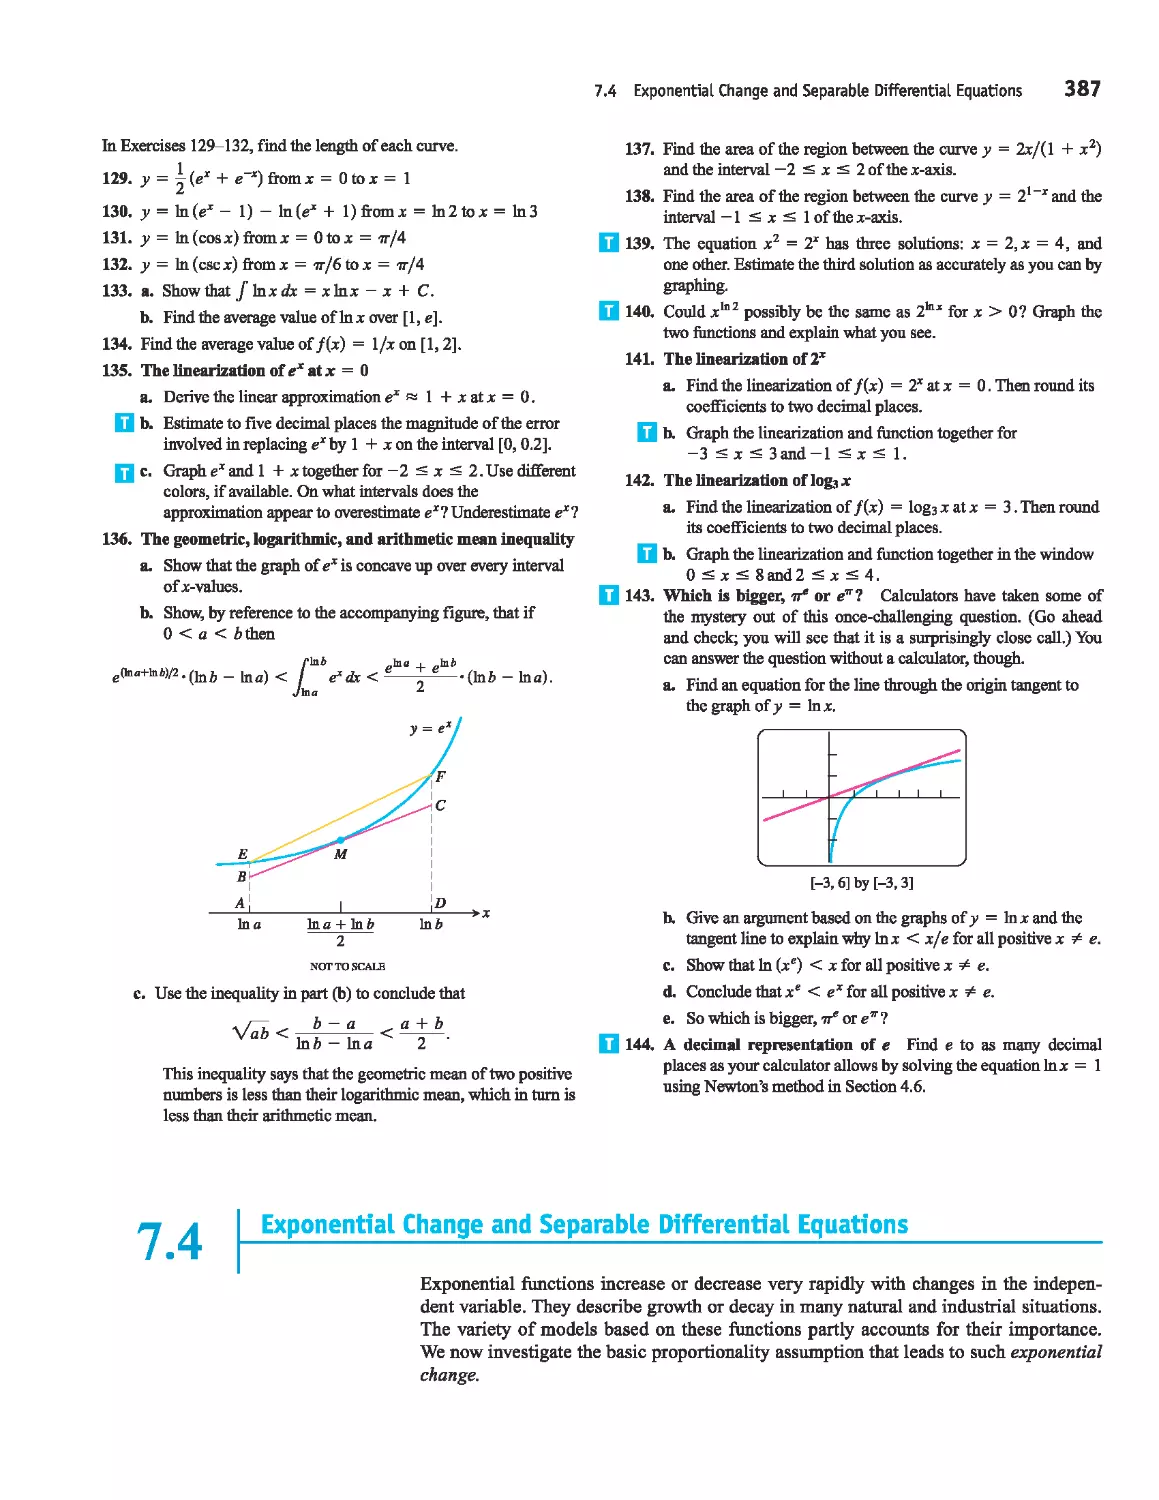 7.4 - Exponential Change and Seperable Differential Equations